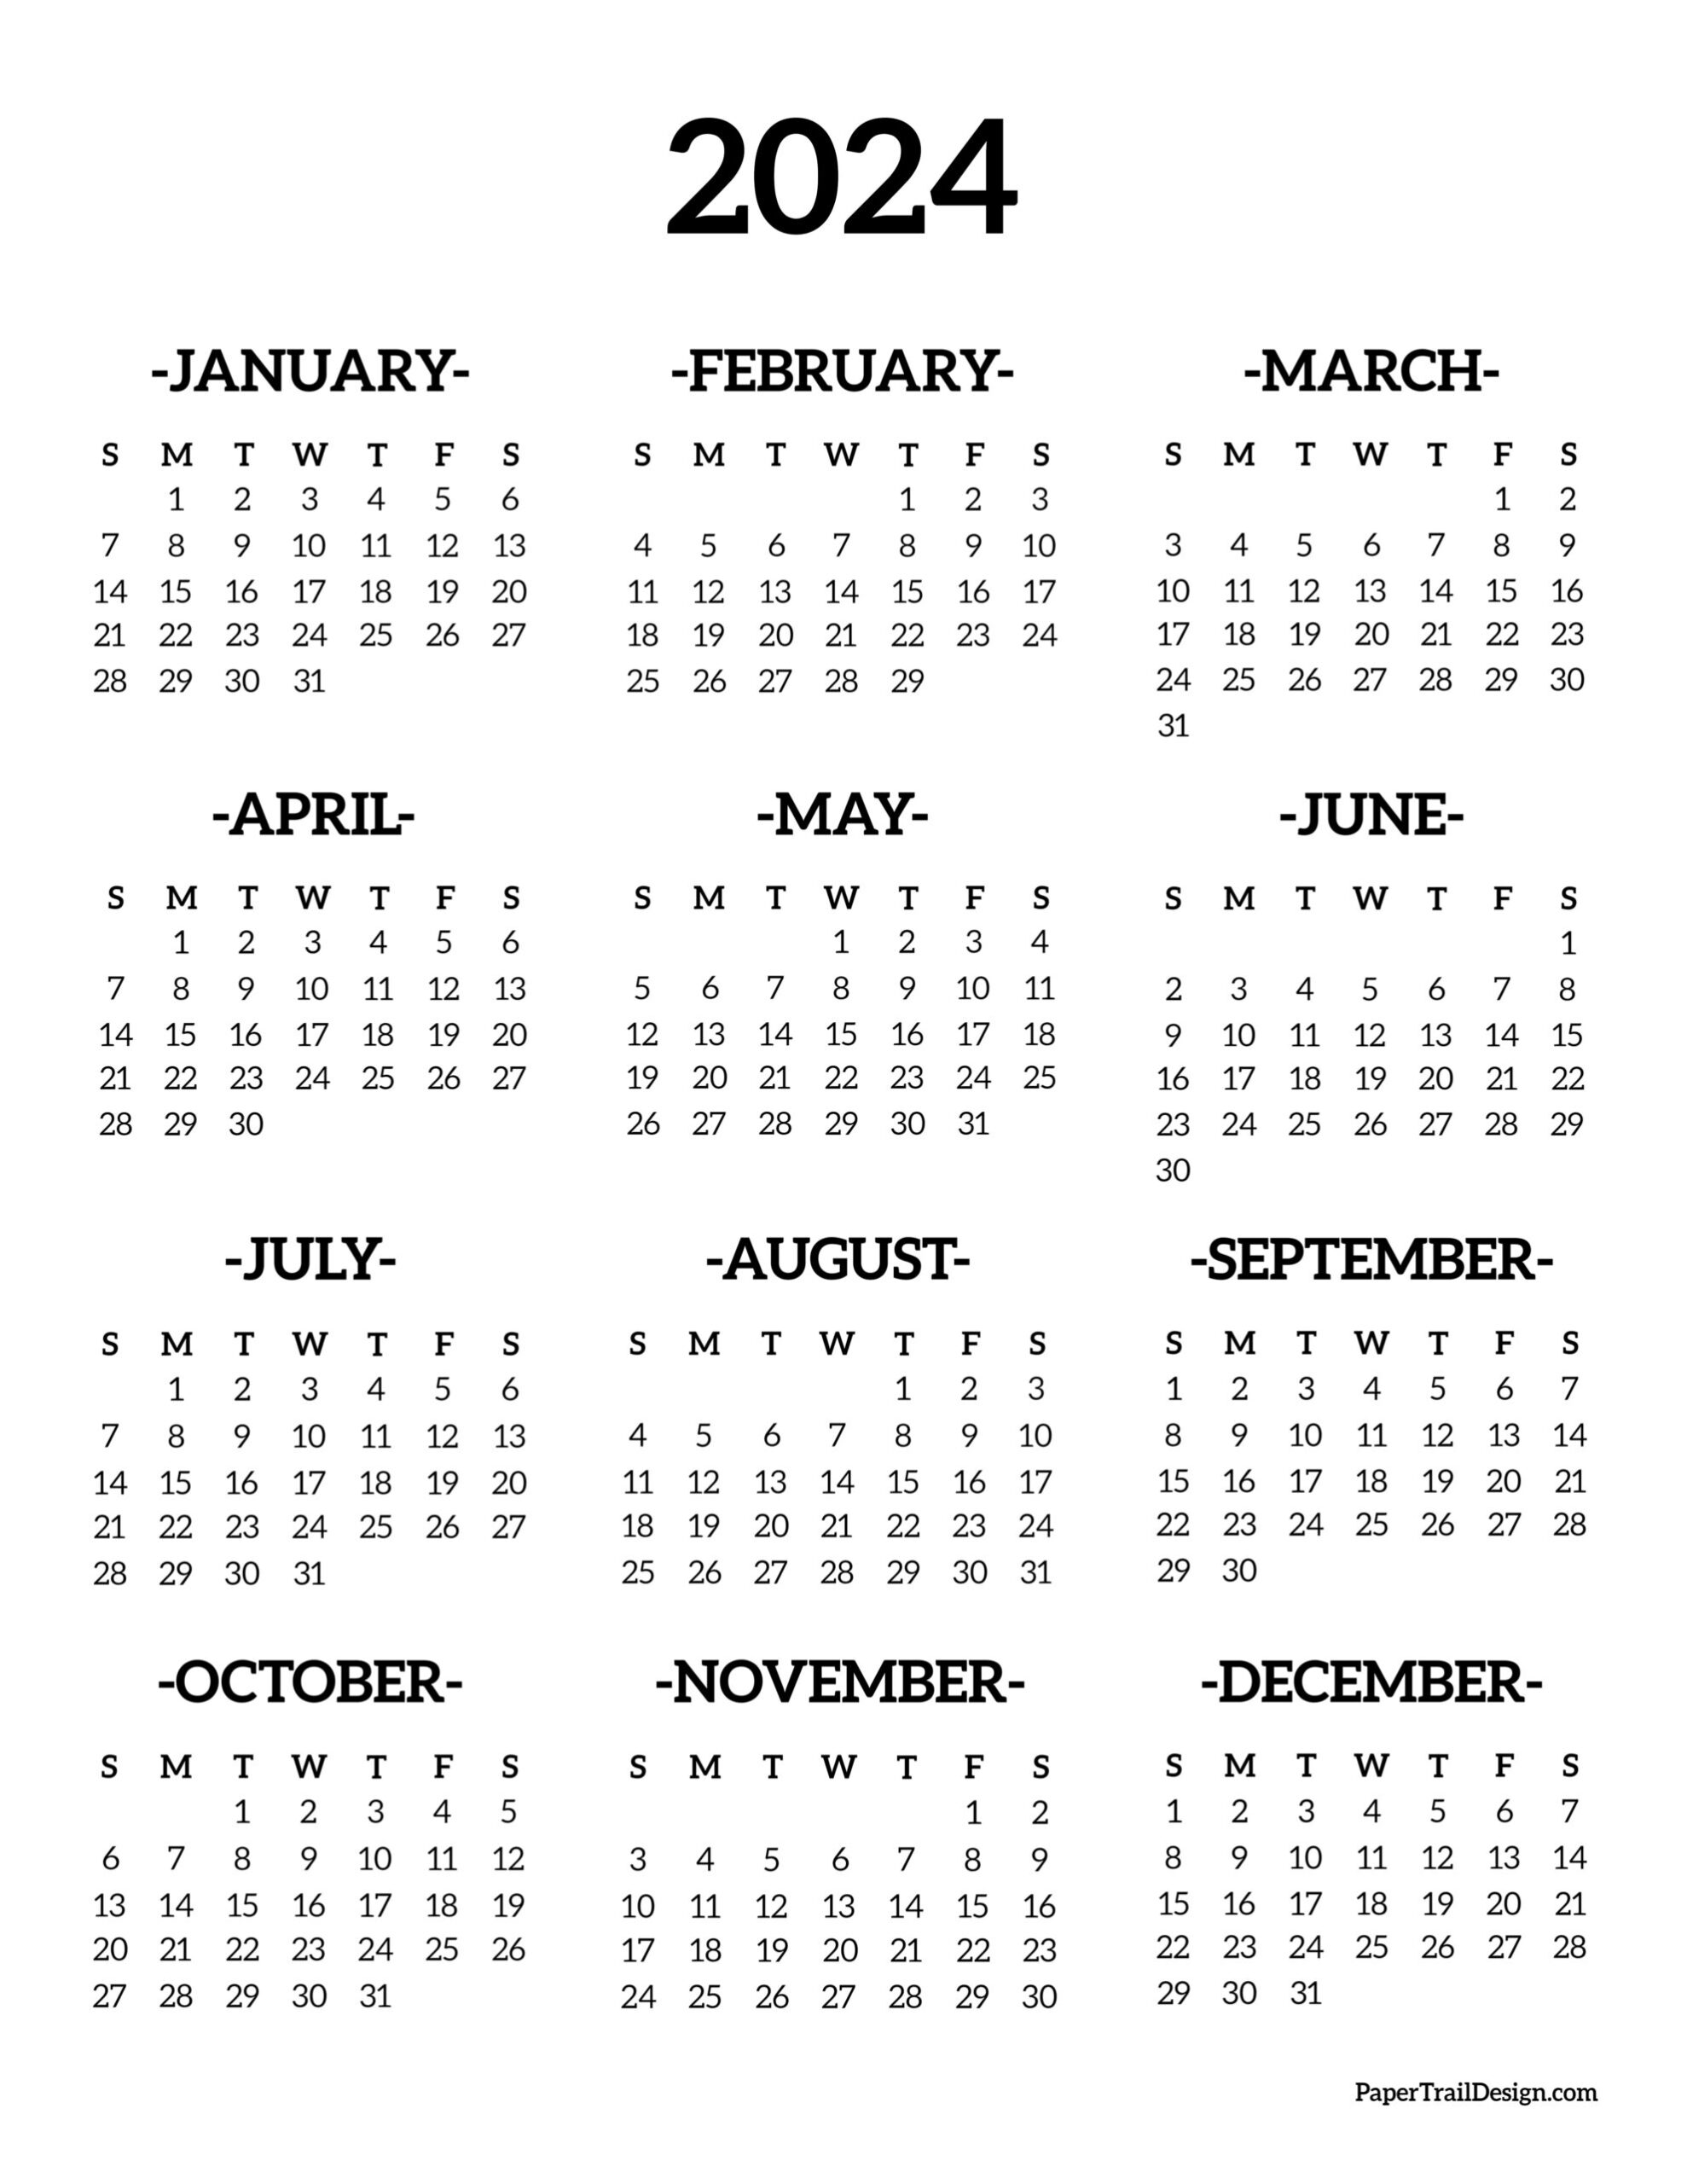 Calendar 2024 Printable One Page - Paper Trail Design for 2024 Full Year Calendar Printable